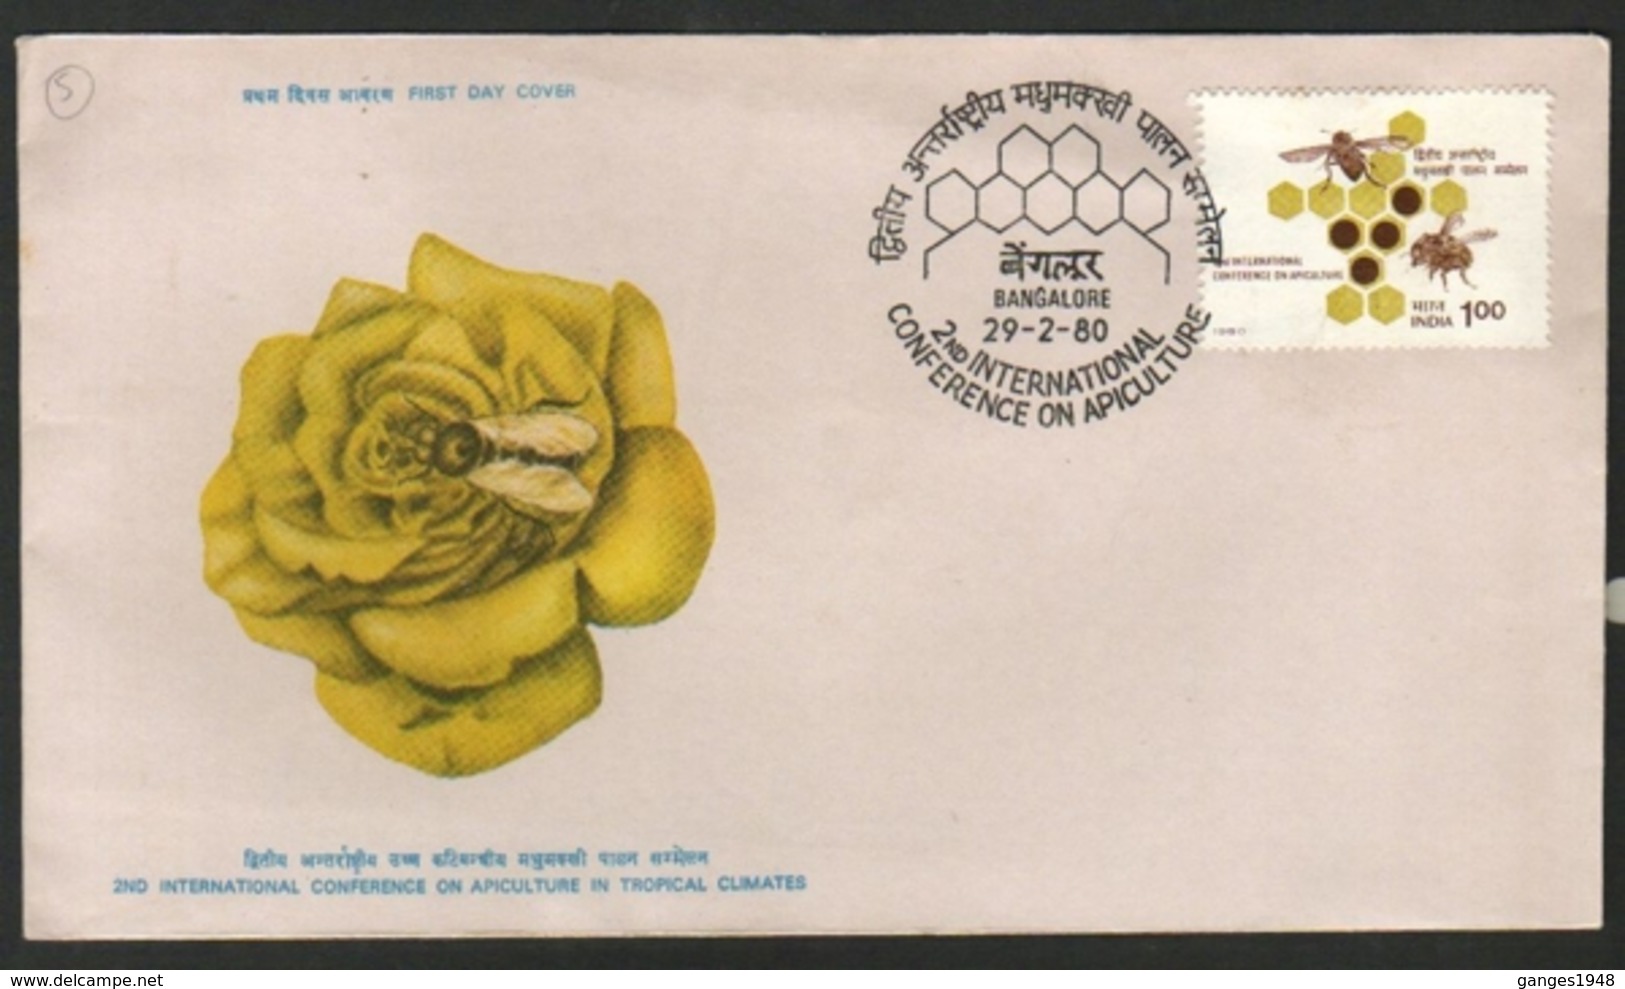 India  1980 Honeybees - 2nd Internation Conference On Apiculture  Bangalore  FD Cover  # 18861   D  Inde Indien - Abeilles